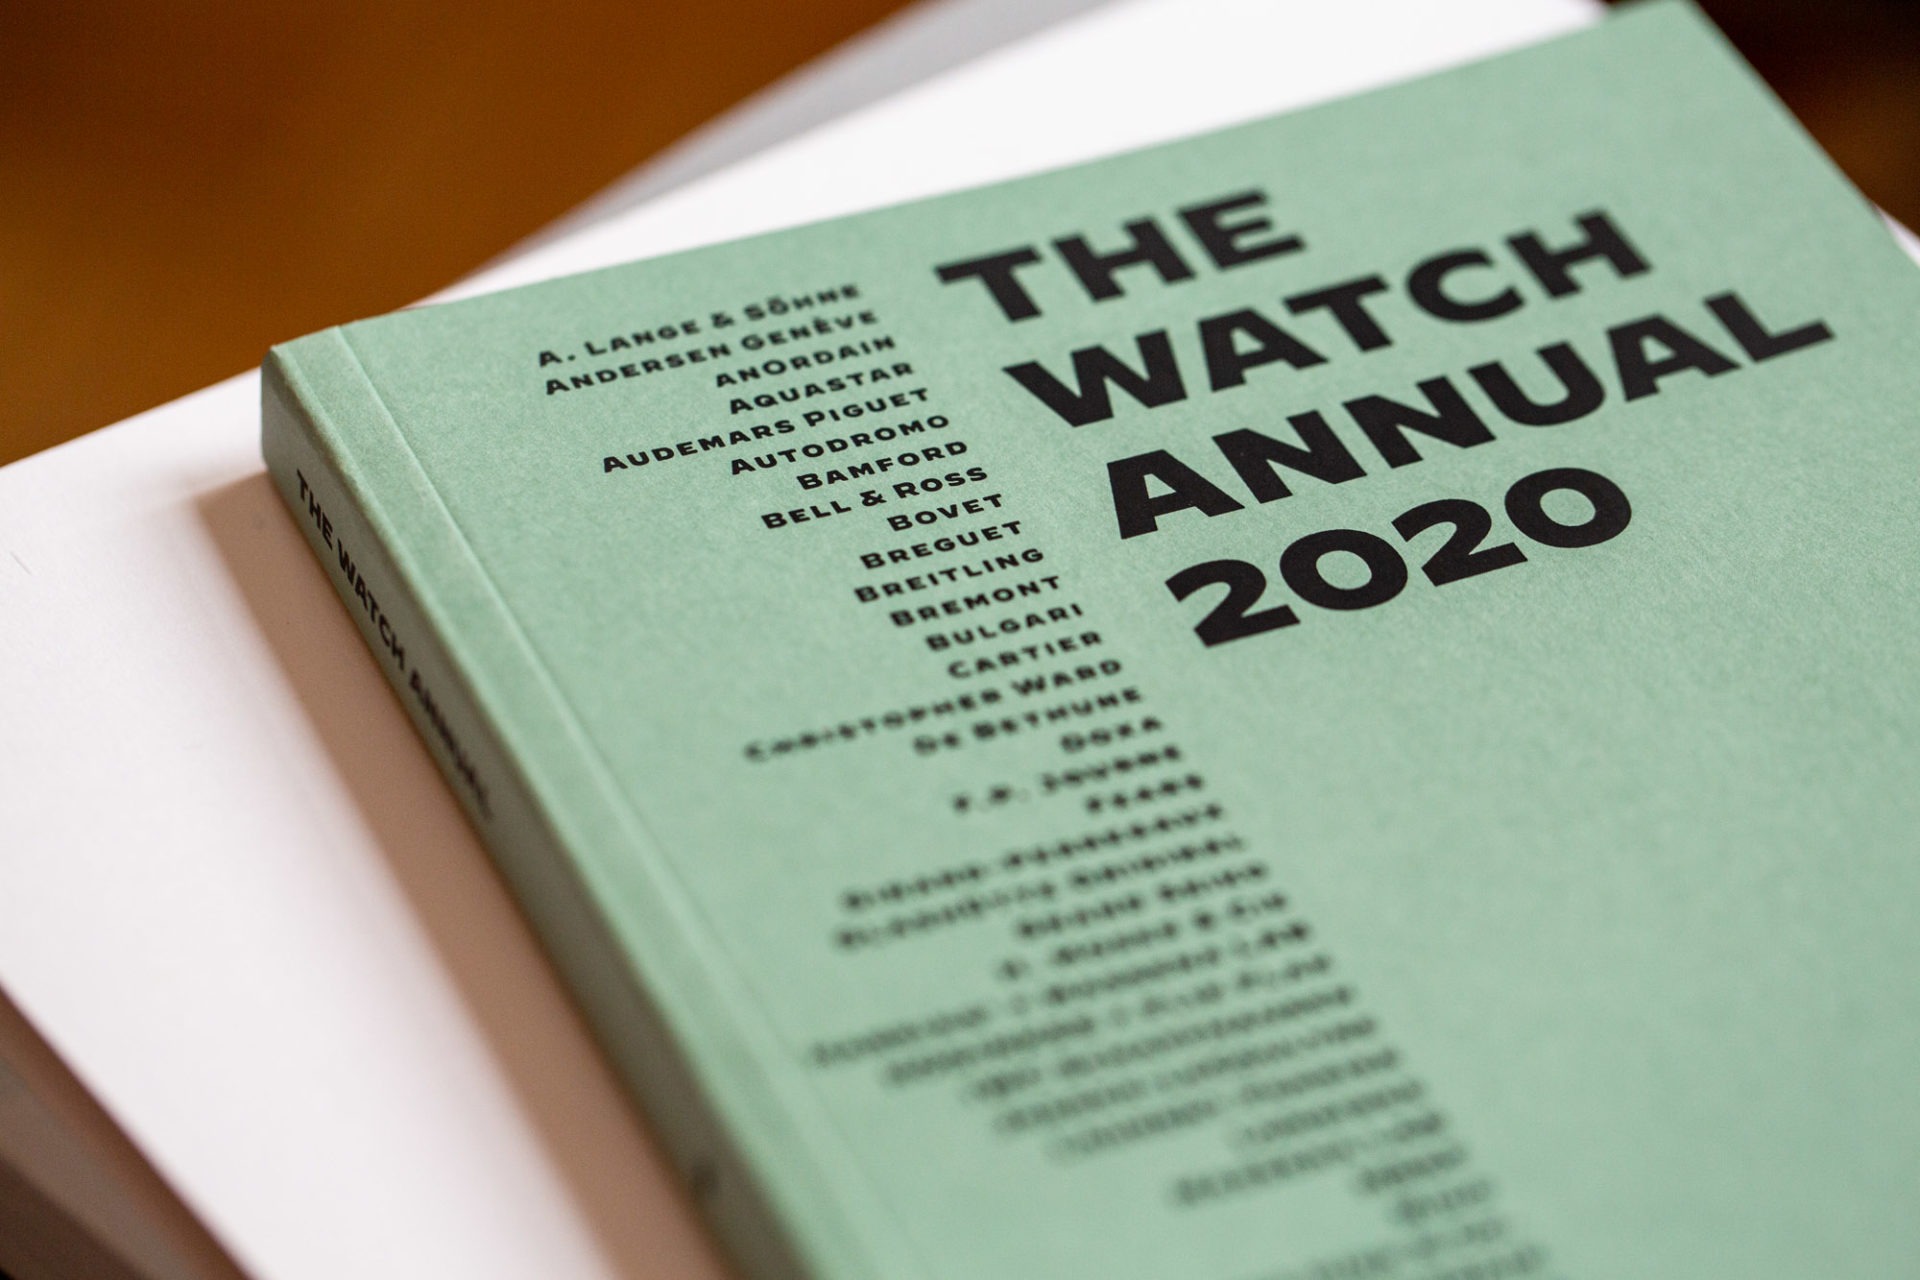 The Watch Annual 2020